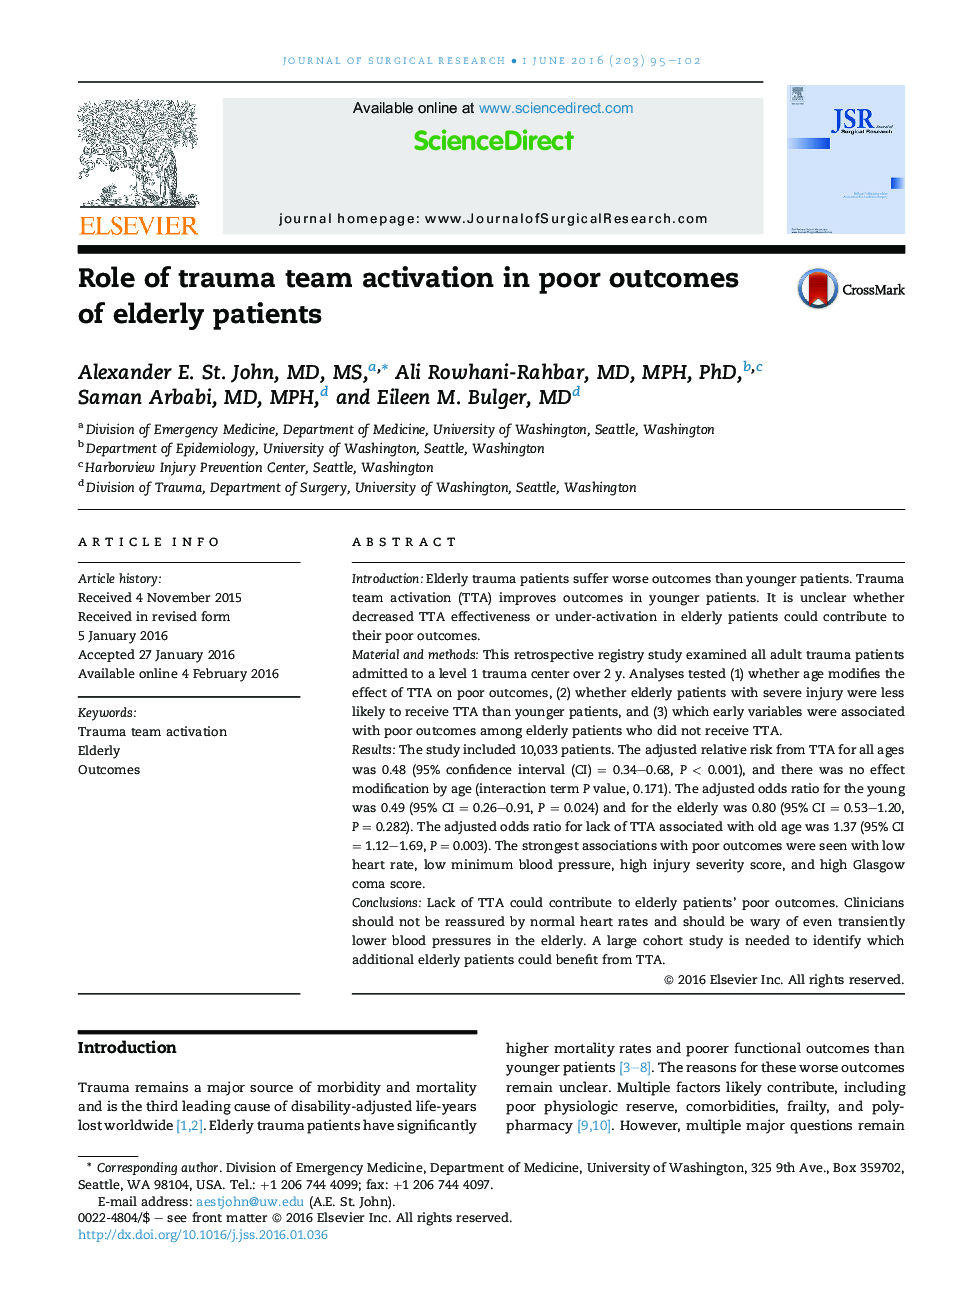 Role of trauma team activation in poor outcomes of elderly patients